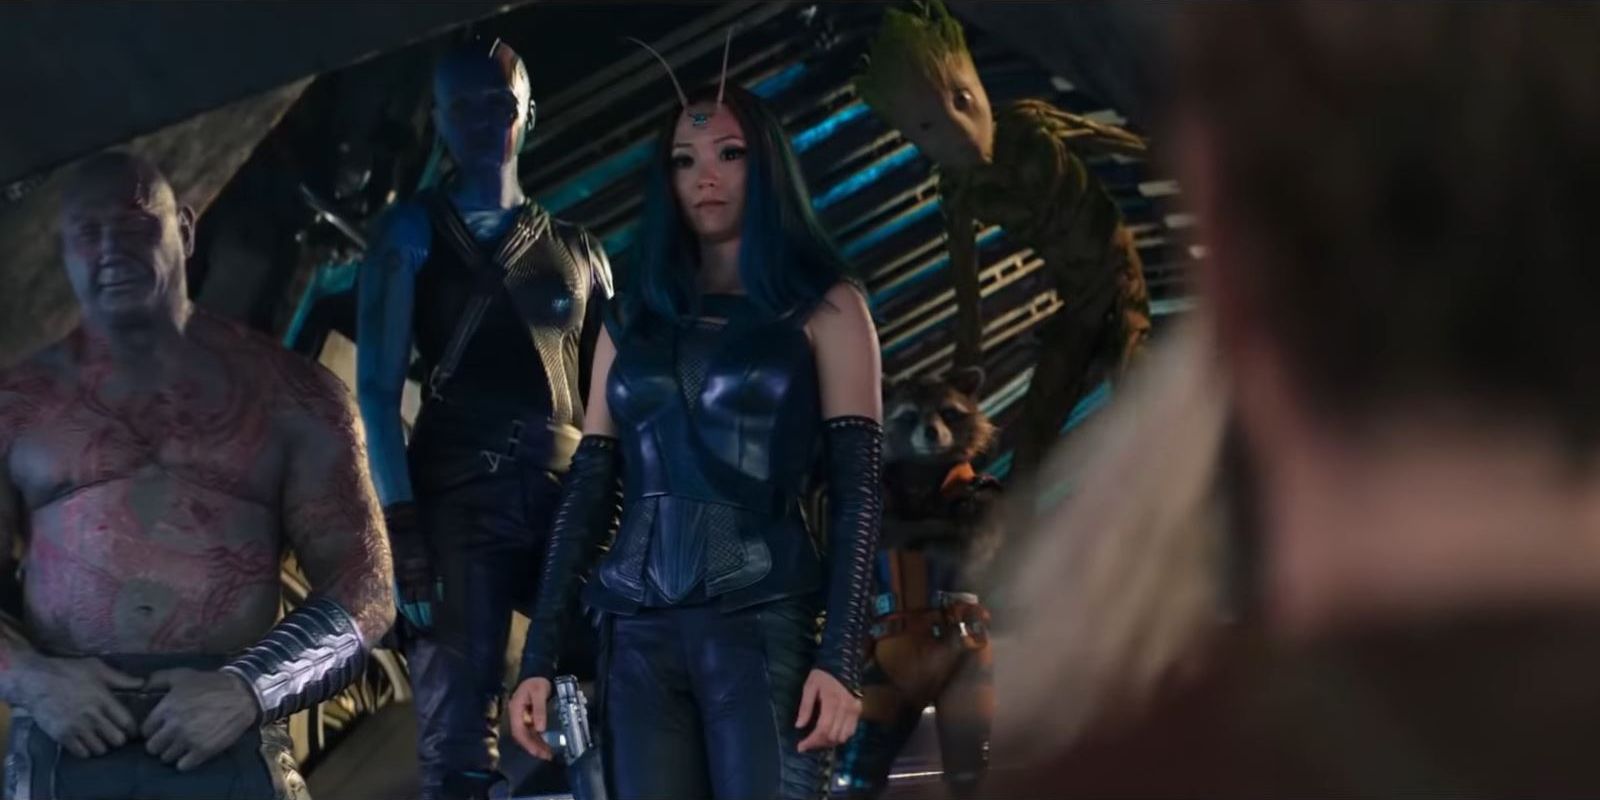 Drax, Nebula, Mantis, Rocket, and Groot look at Quill and Thor as they talk about love in the Thor: Love And Thunder trailer.